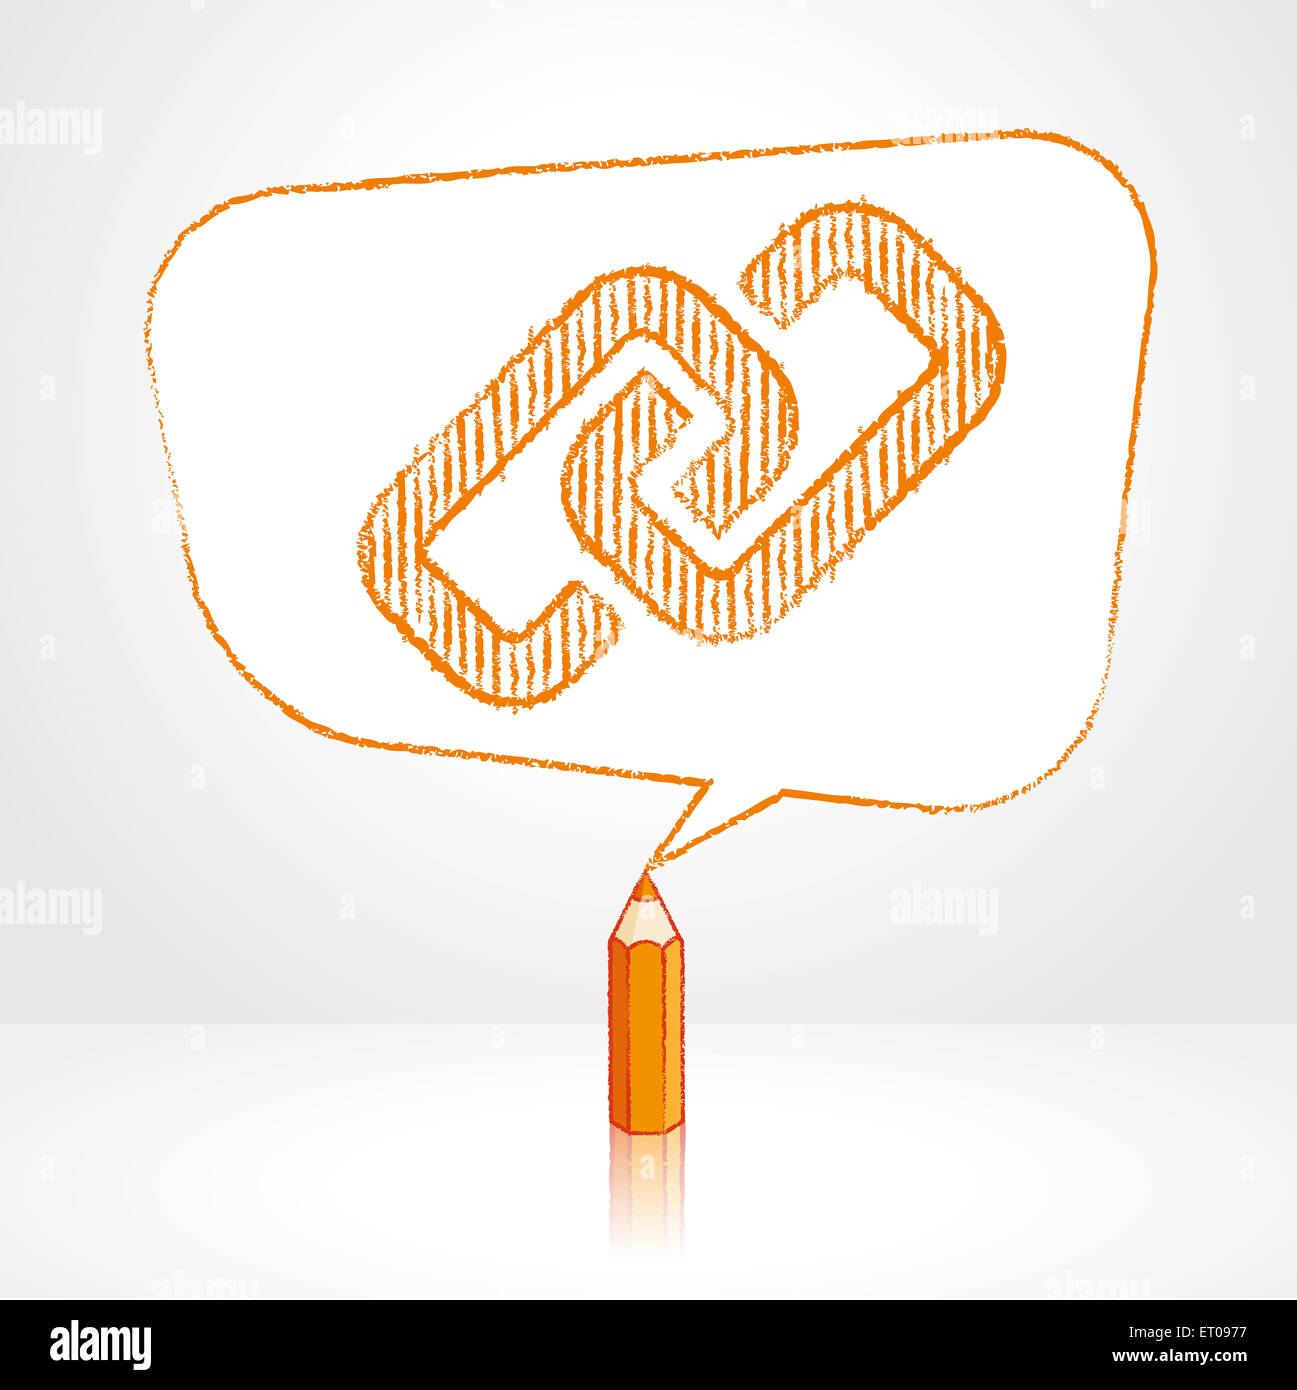 Orange Pencil with Reflection Drawing Digital Media Link Icon in Rounded Skewed Rectangular Shaped Speech Bubble on Pale Backgro Stock Photo